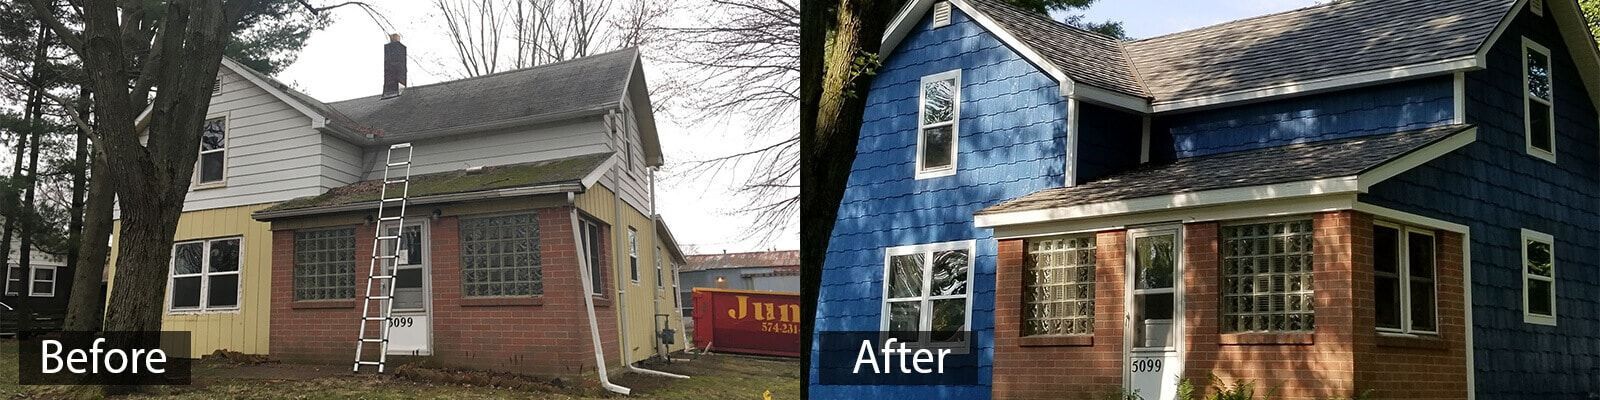 Heying before and after - South Bend, IN - A&M Home Services